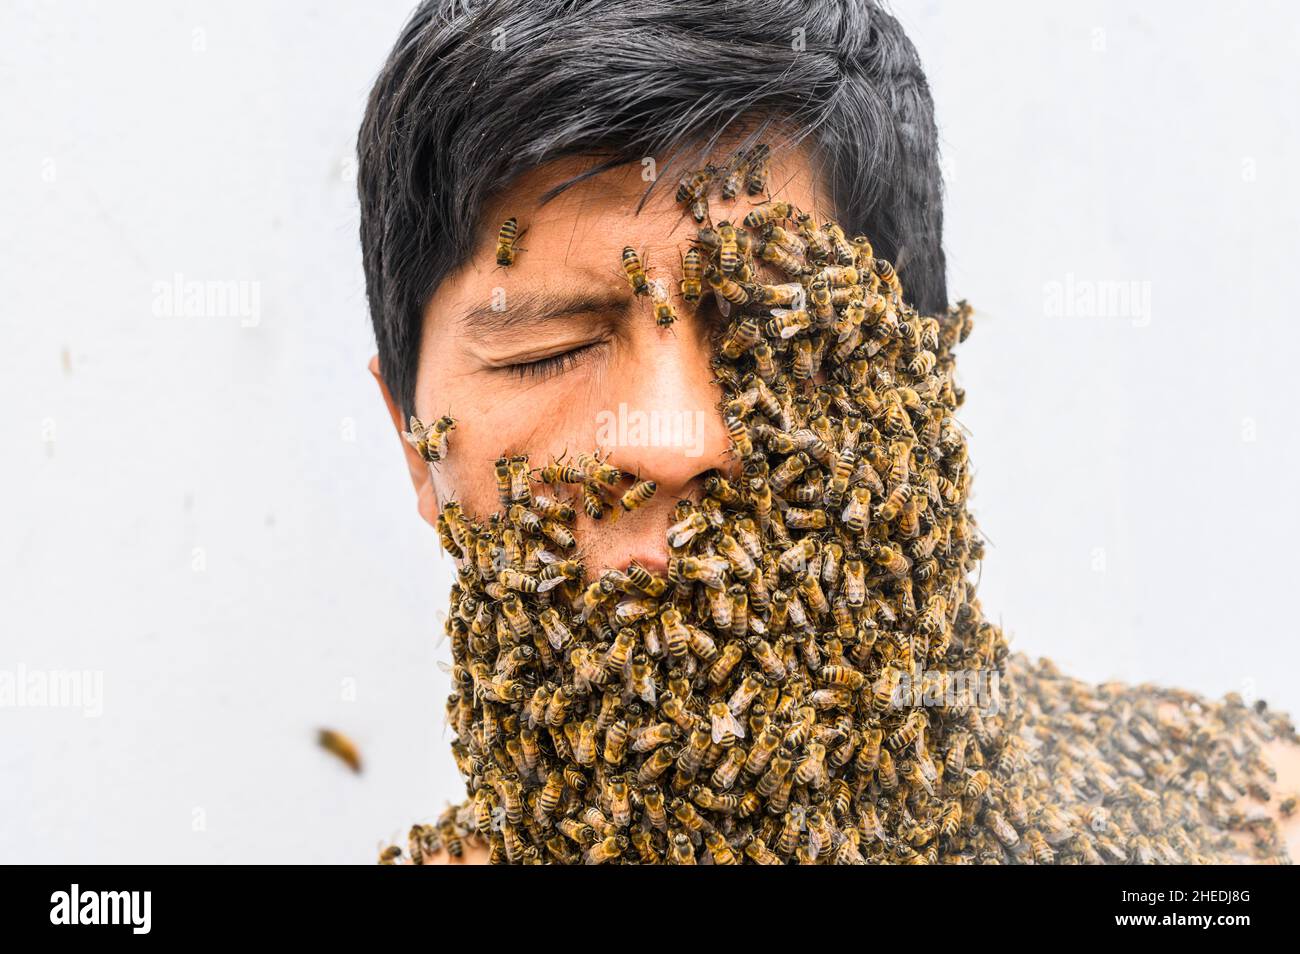 Man's face covered by bees Stock Photo